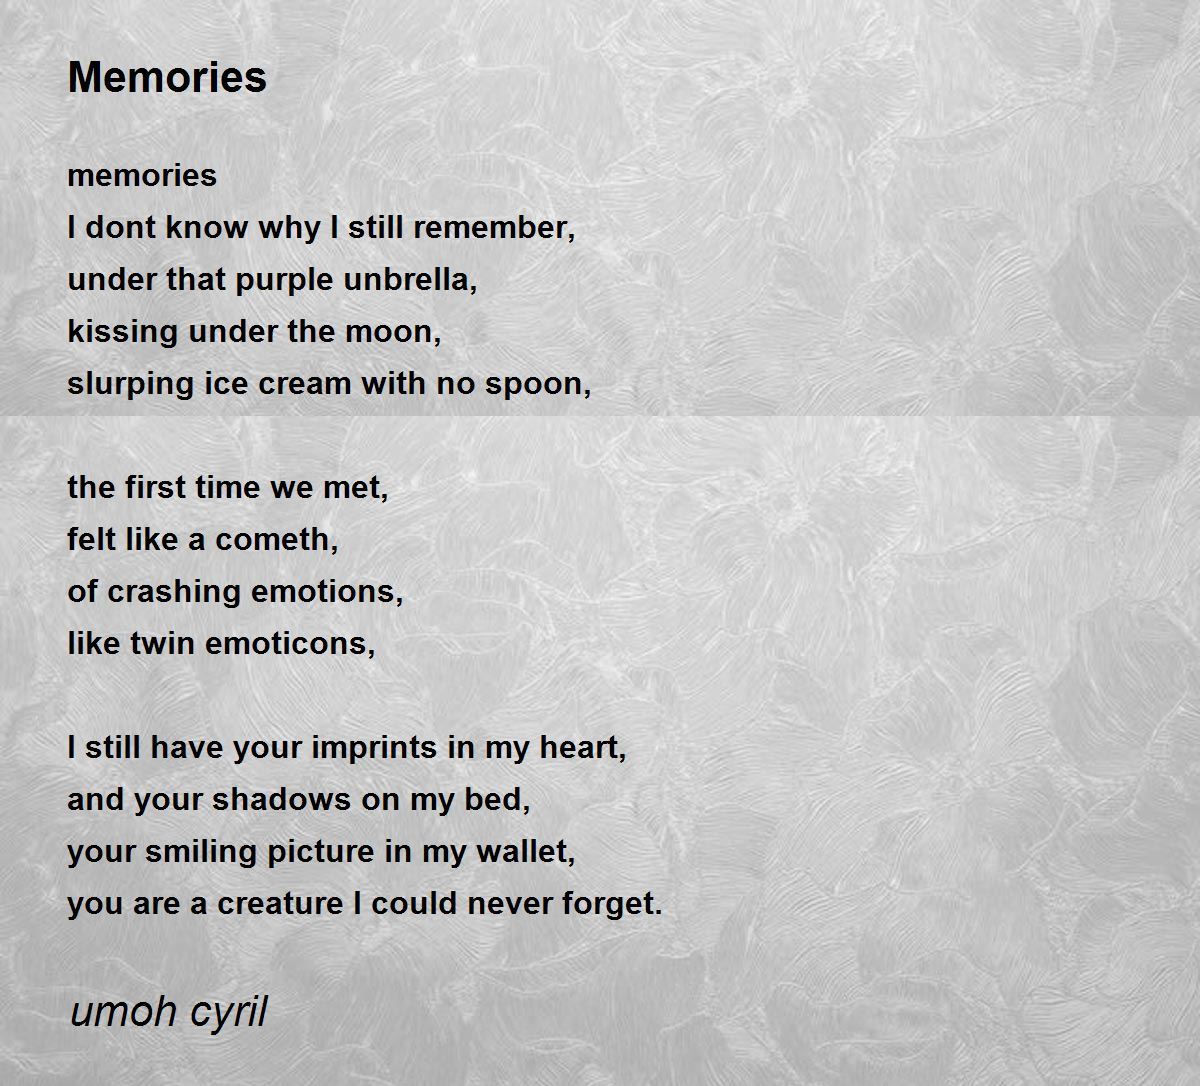 Quit Playing Games With My Heart - Quit Playing Games With My Heart Poem by  umoh cyril